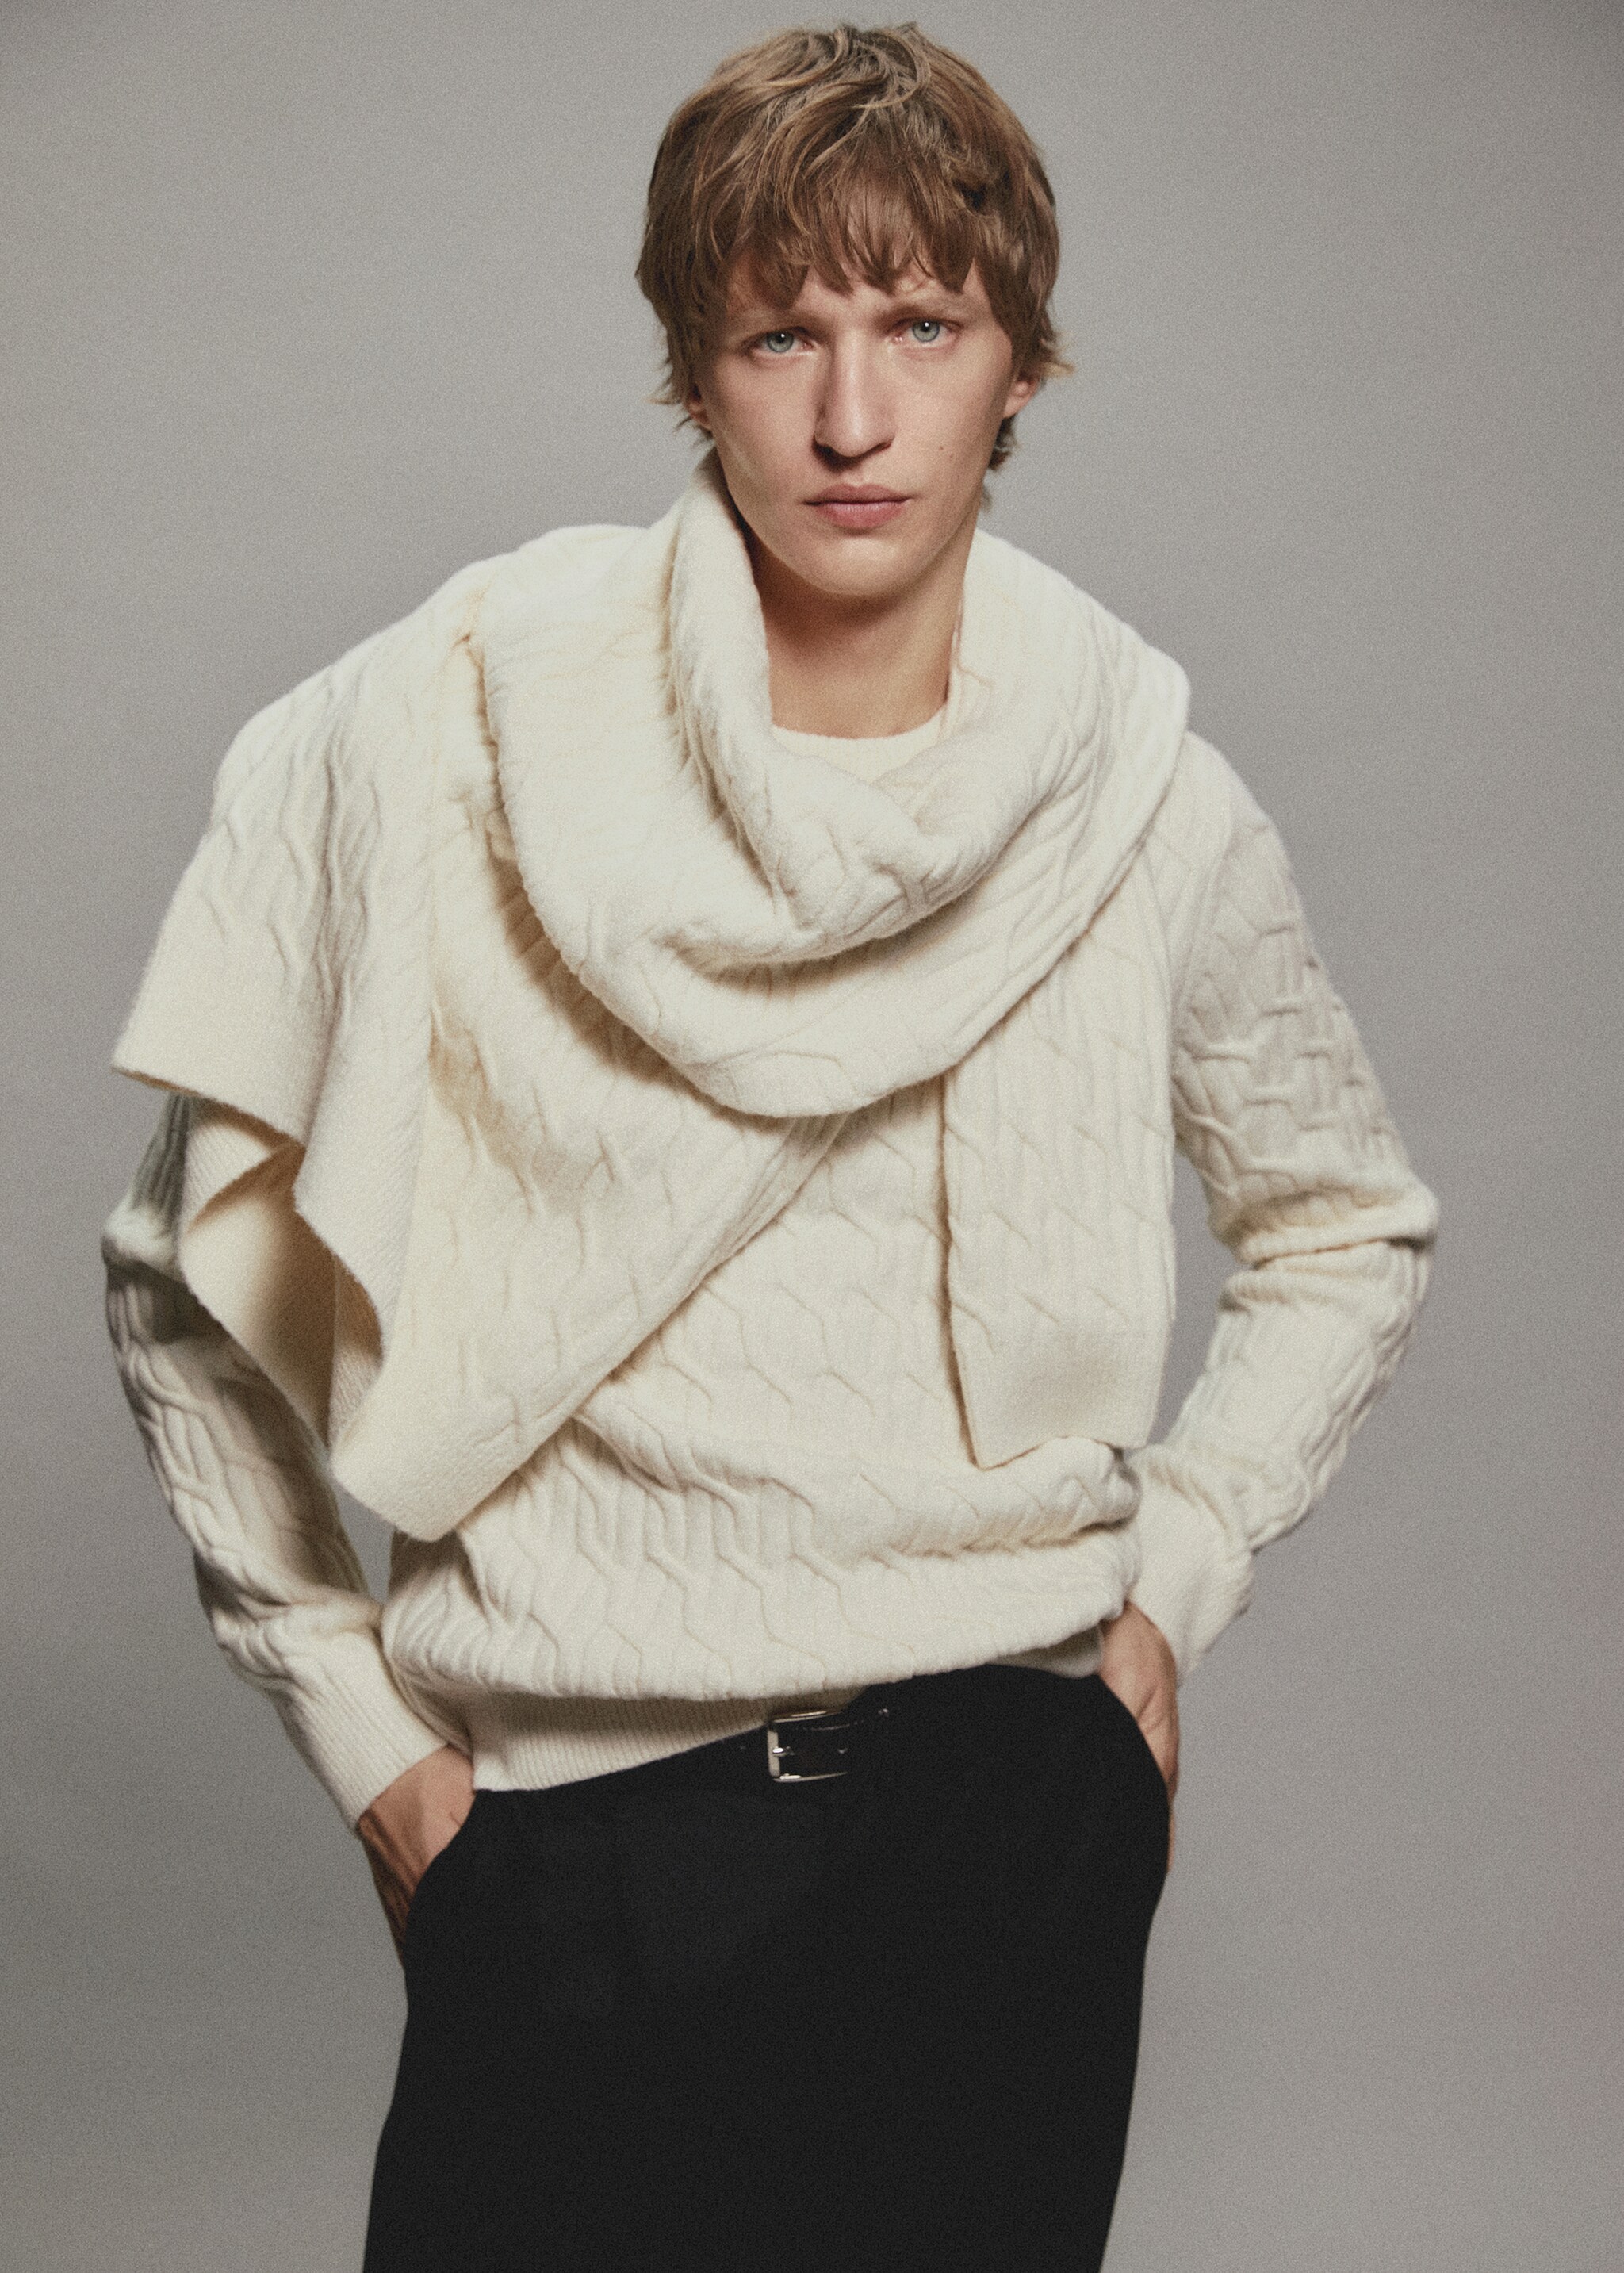 Braided knitted sweater - Details of the article 5